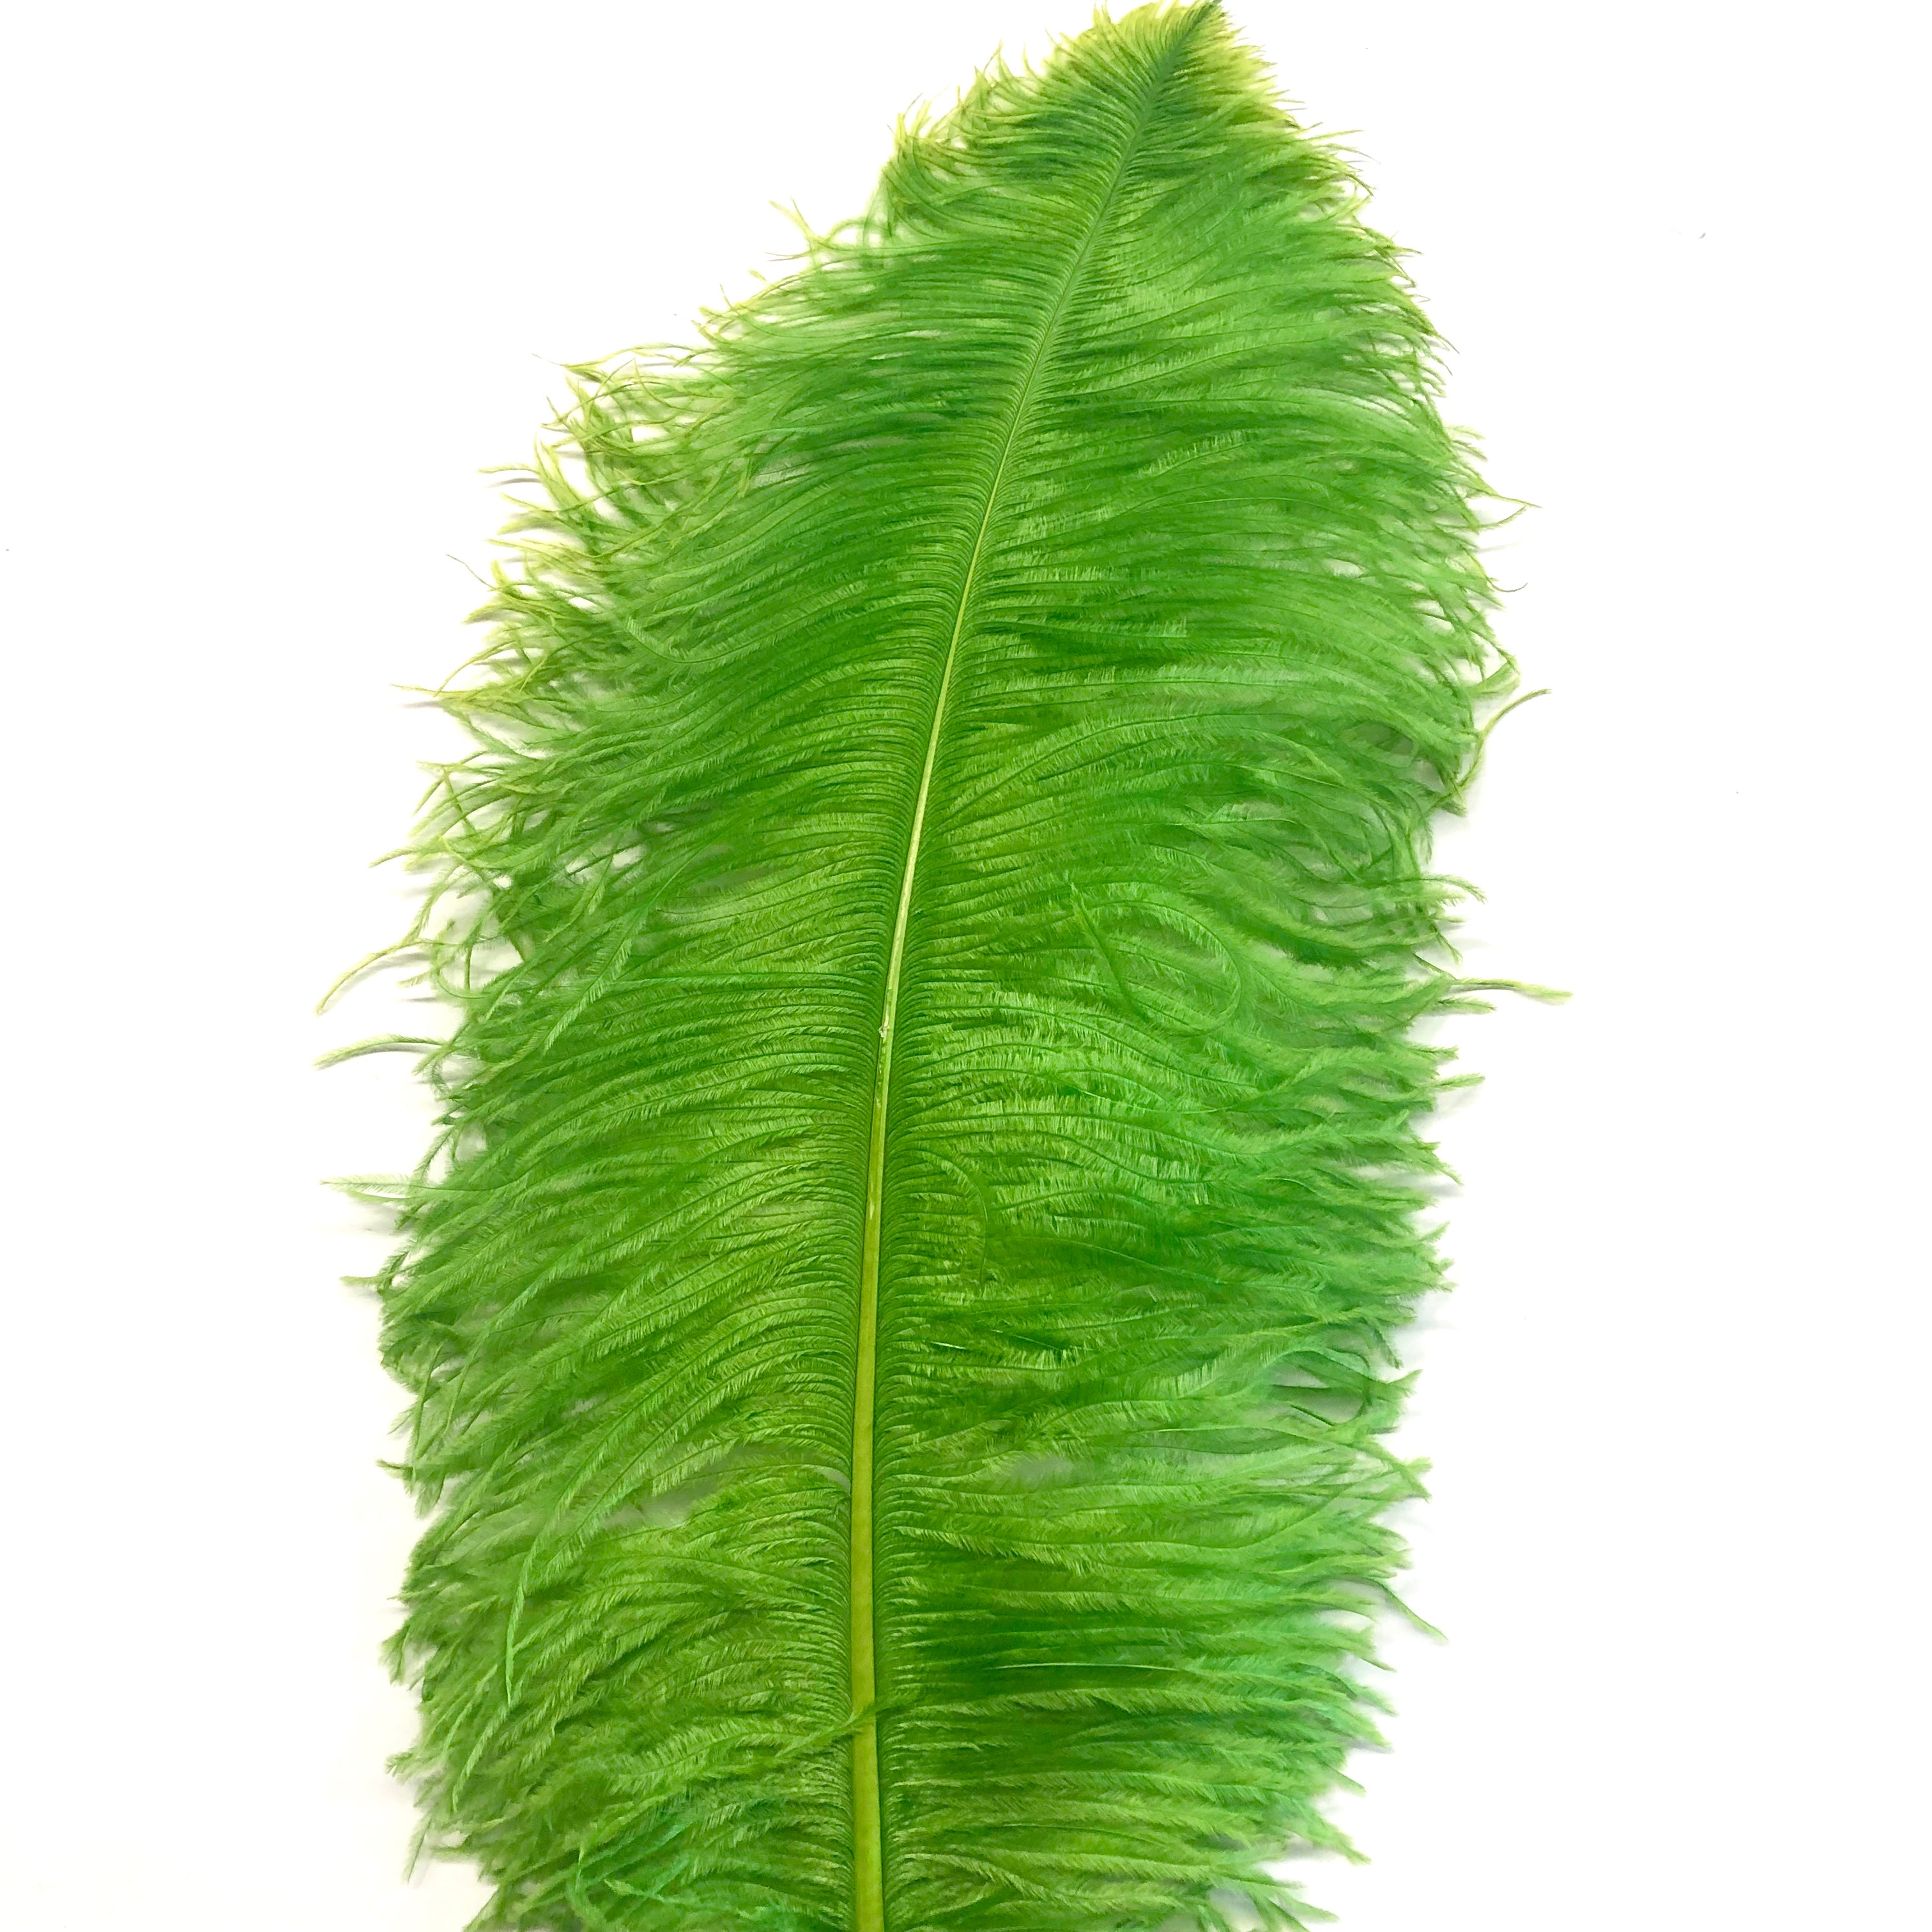 Ostrich Wing Feather Plumes 50-55cm (20-22") - Lime Green ((SECONDS))